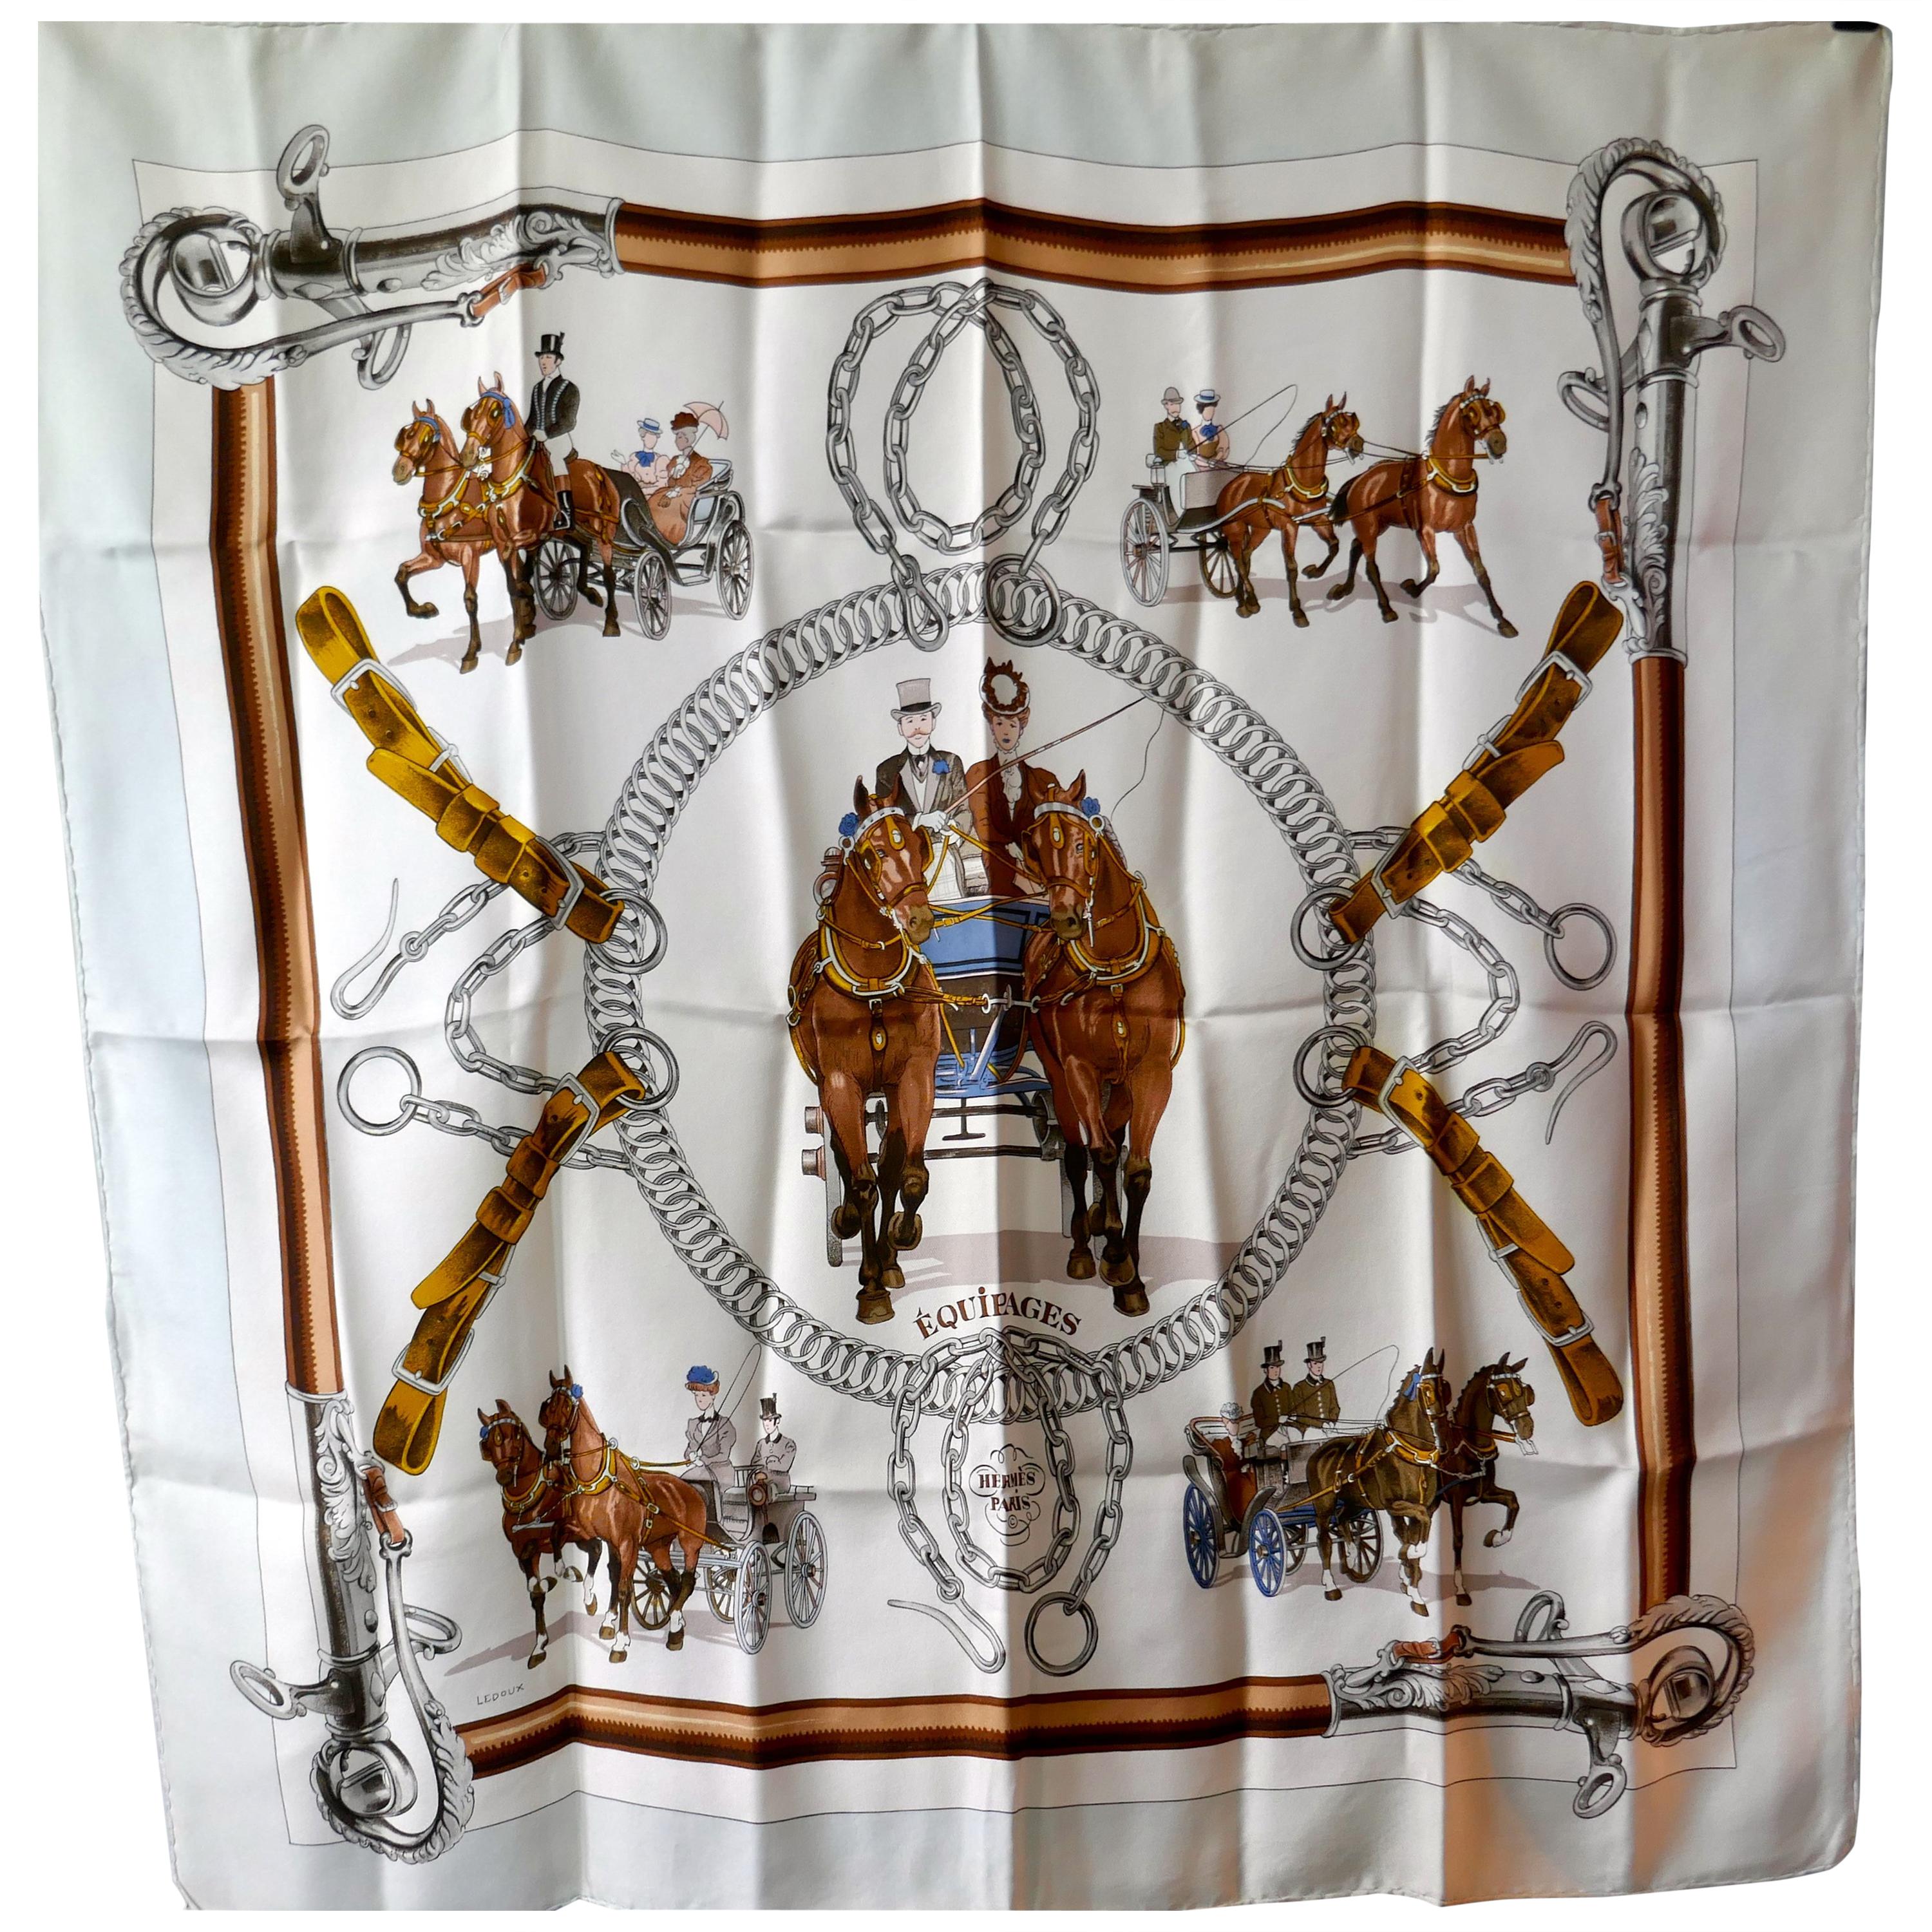 Hermes Vintage Silk Scarf “EQUIPAGES” by Philippe Ledoux,